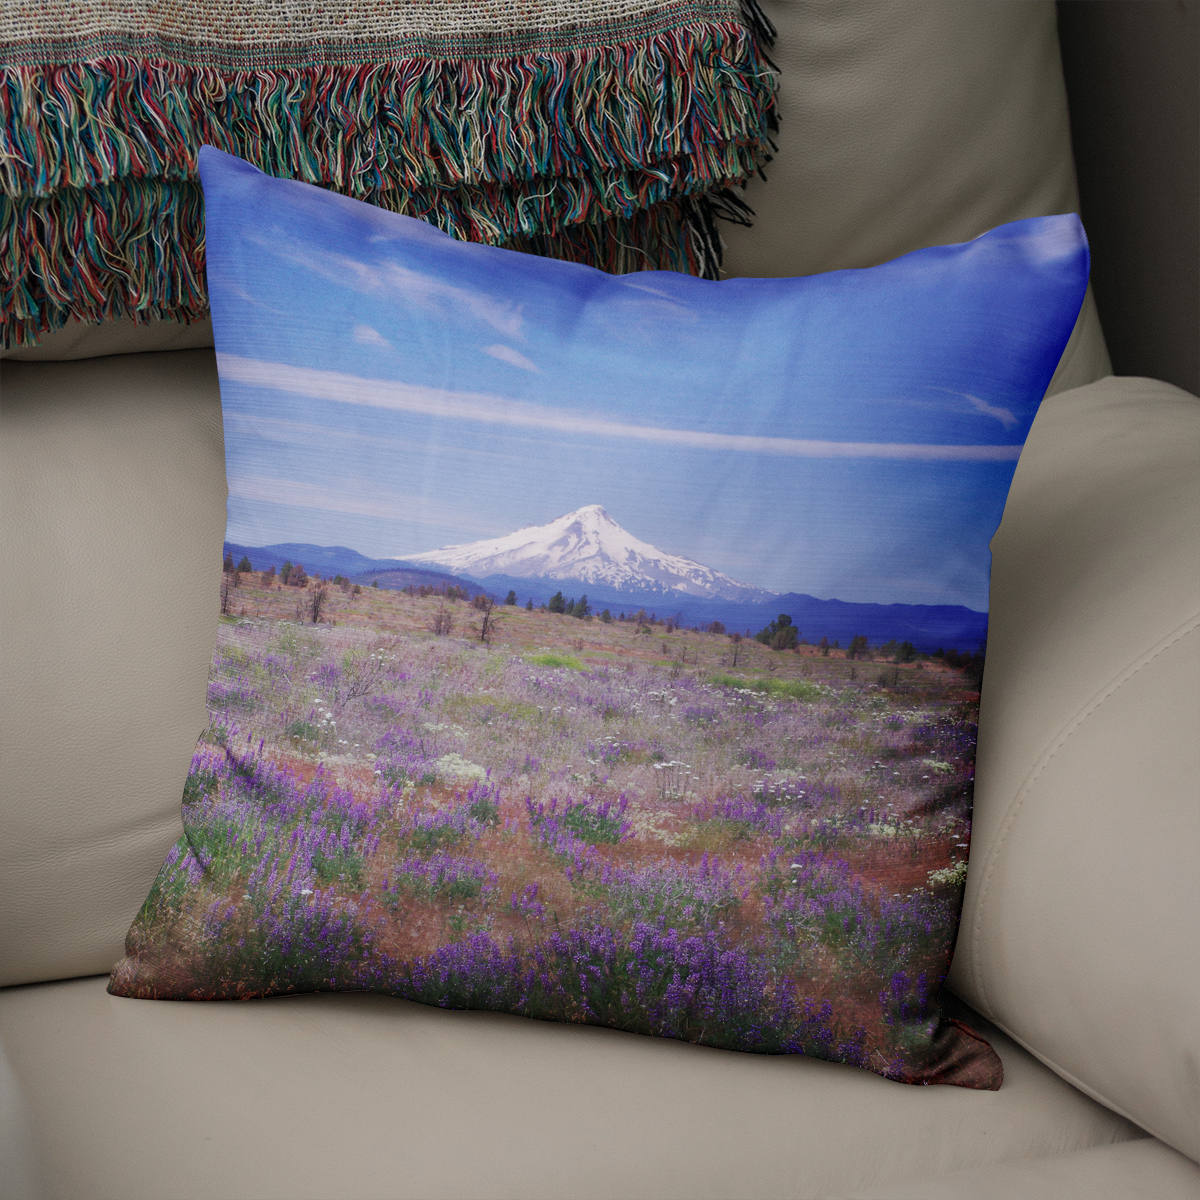 Mt Hood Mountain Couch Cushion Pillow Cover Nature Throw -